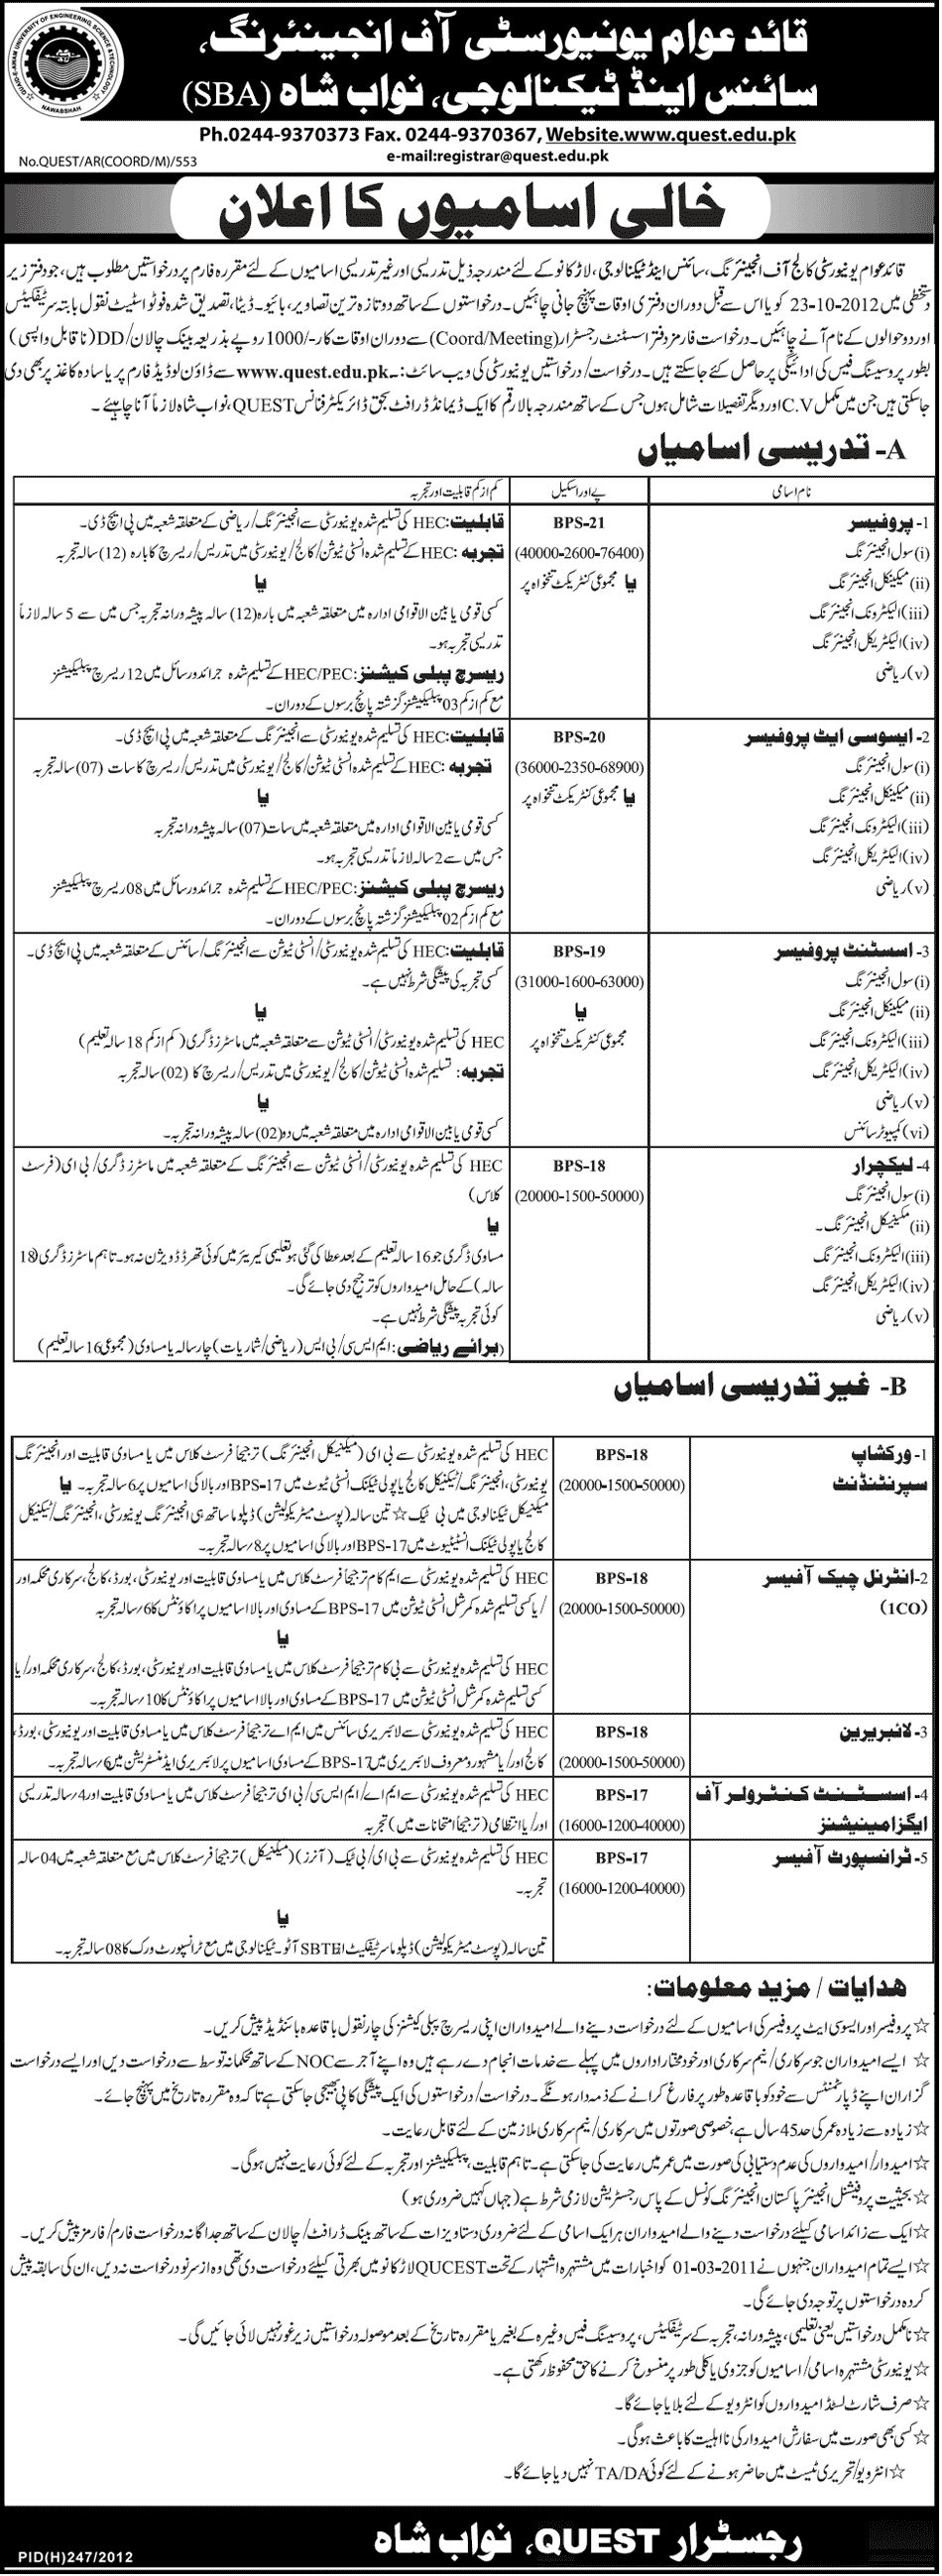 QUEST Quaid-e-Awam University of Engineering, Science and Technology Requries Teaching and Non-Teaching Faculty (Government Job)